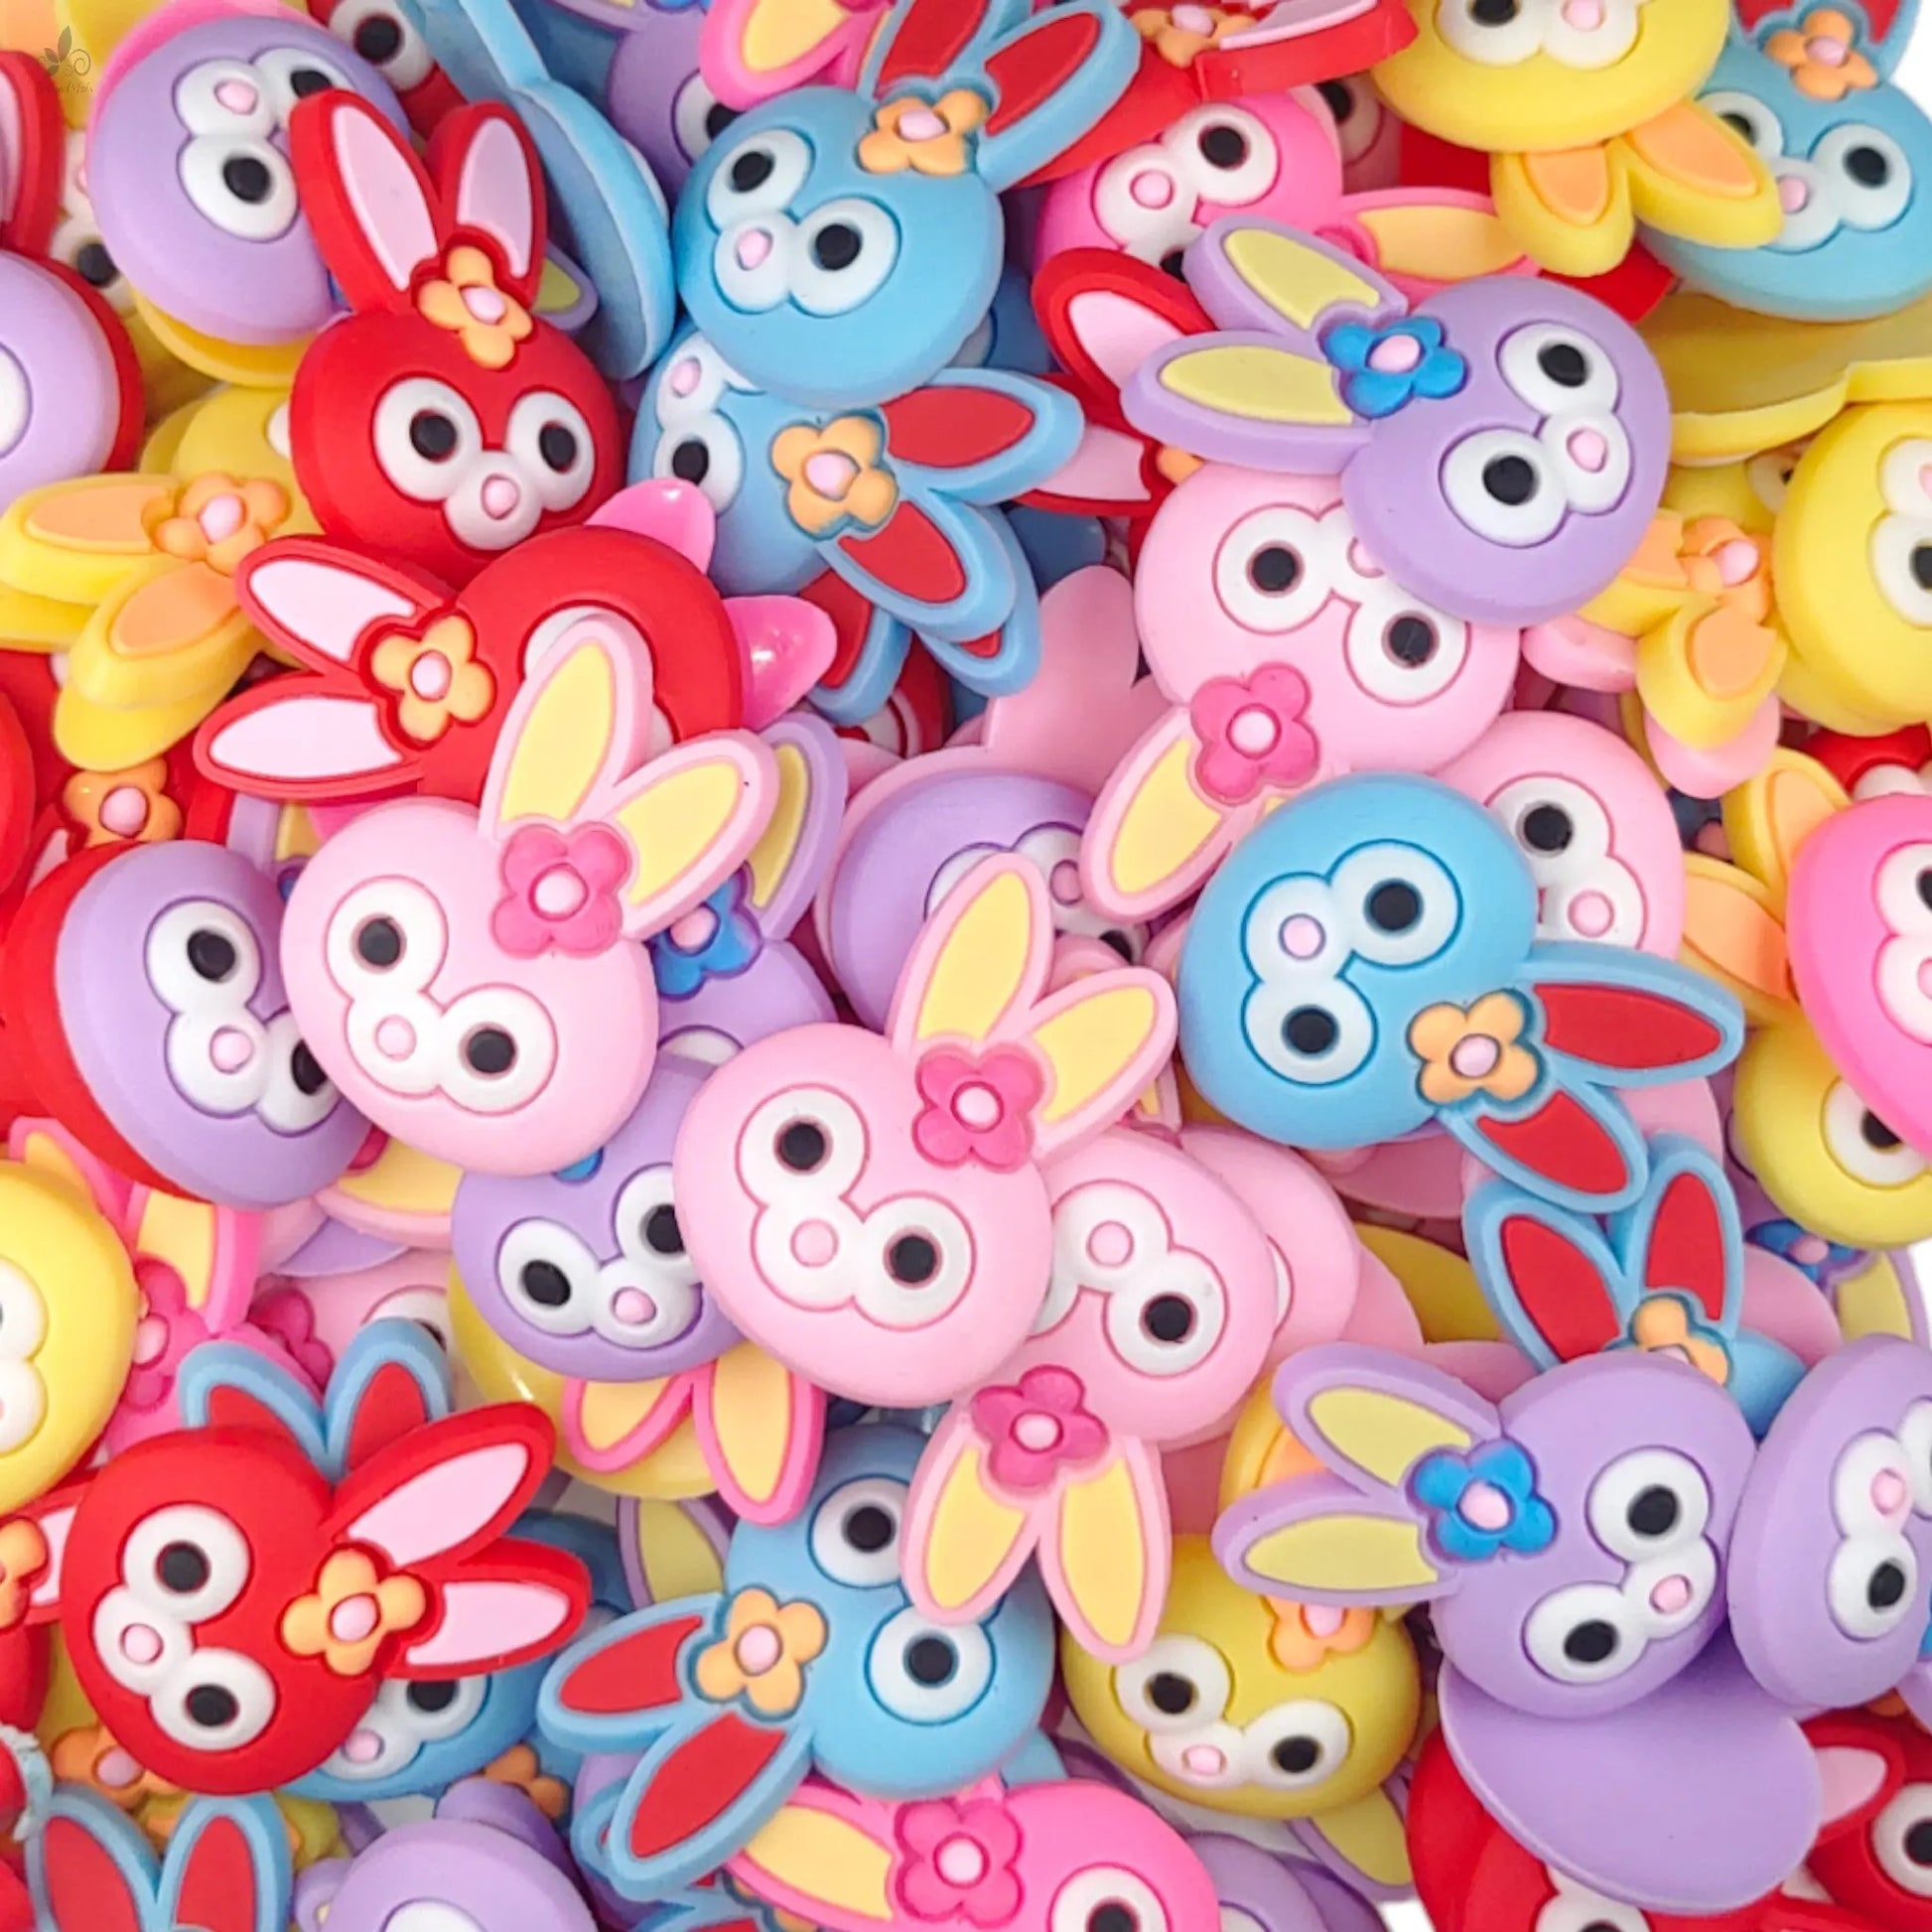 Indian Petals Bunny Face Soft Silicon Resin Motif for Craft or Decoration, 60 Pcs, Mix - 13542